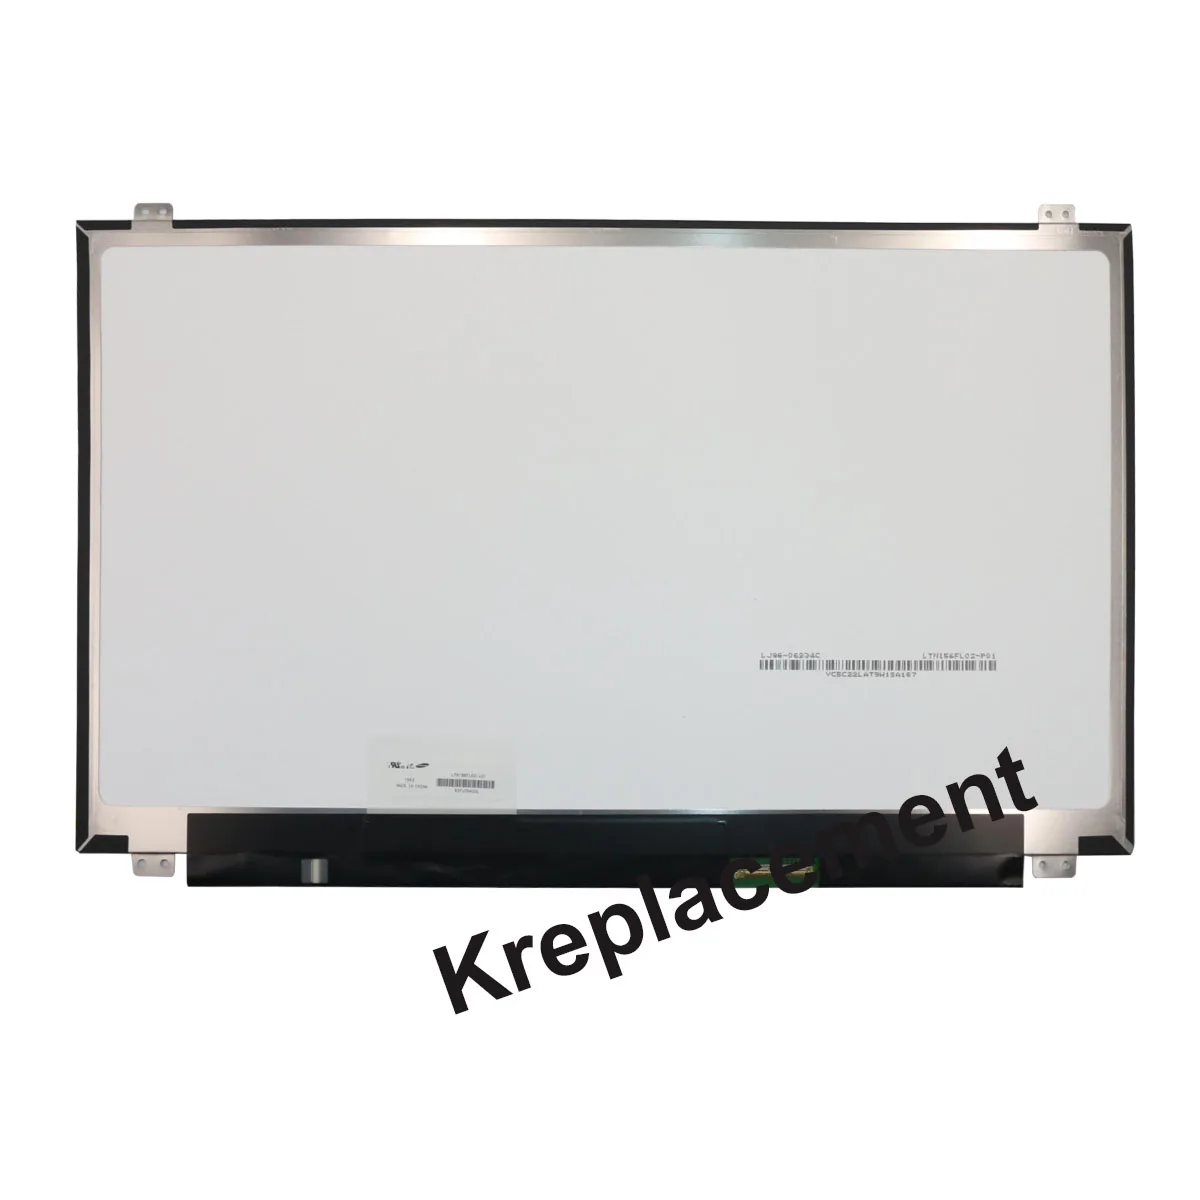 for lenovo fru 18201585 18201584 5d10l08702 15 6 fhd 1080p led lcd display screen panel replacement free global shipping